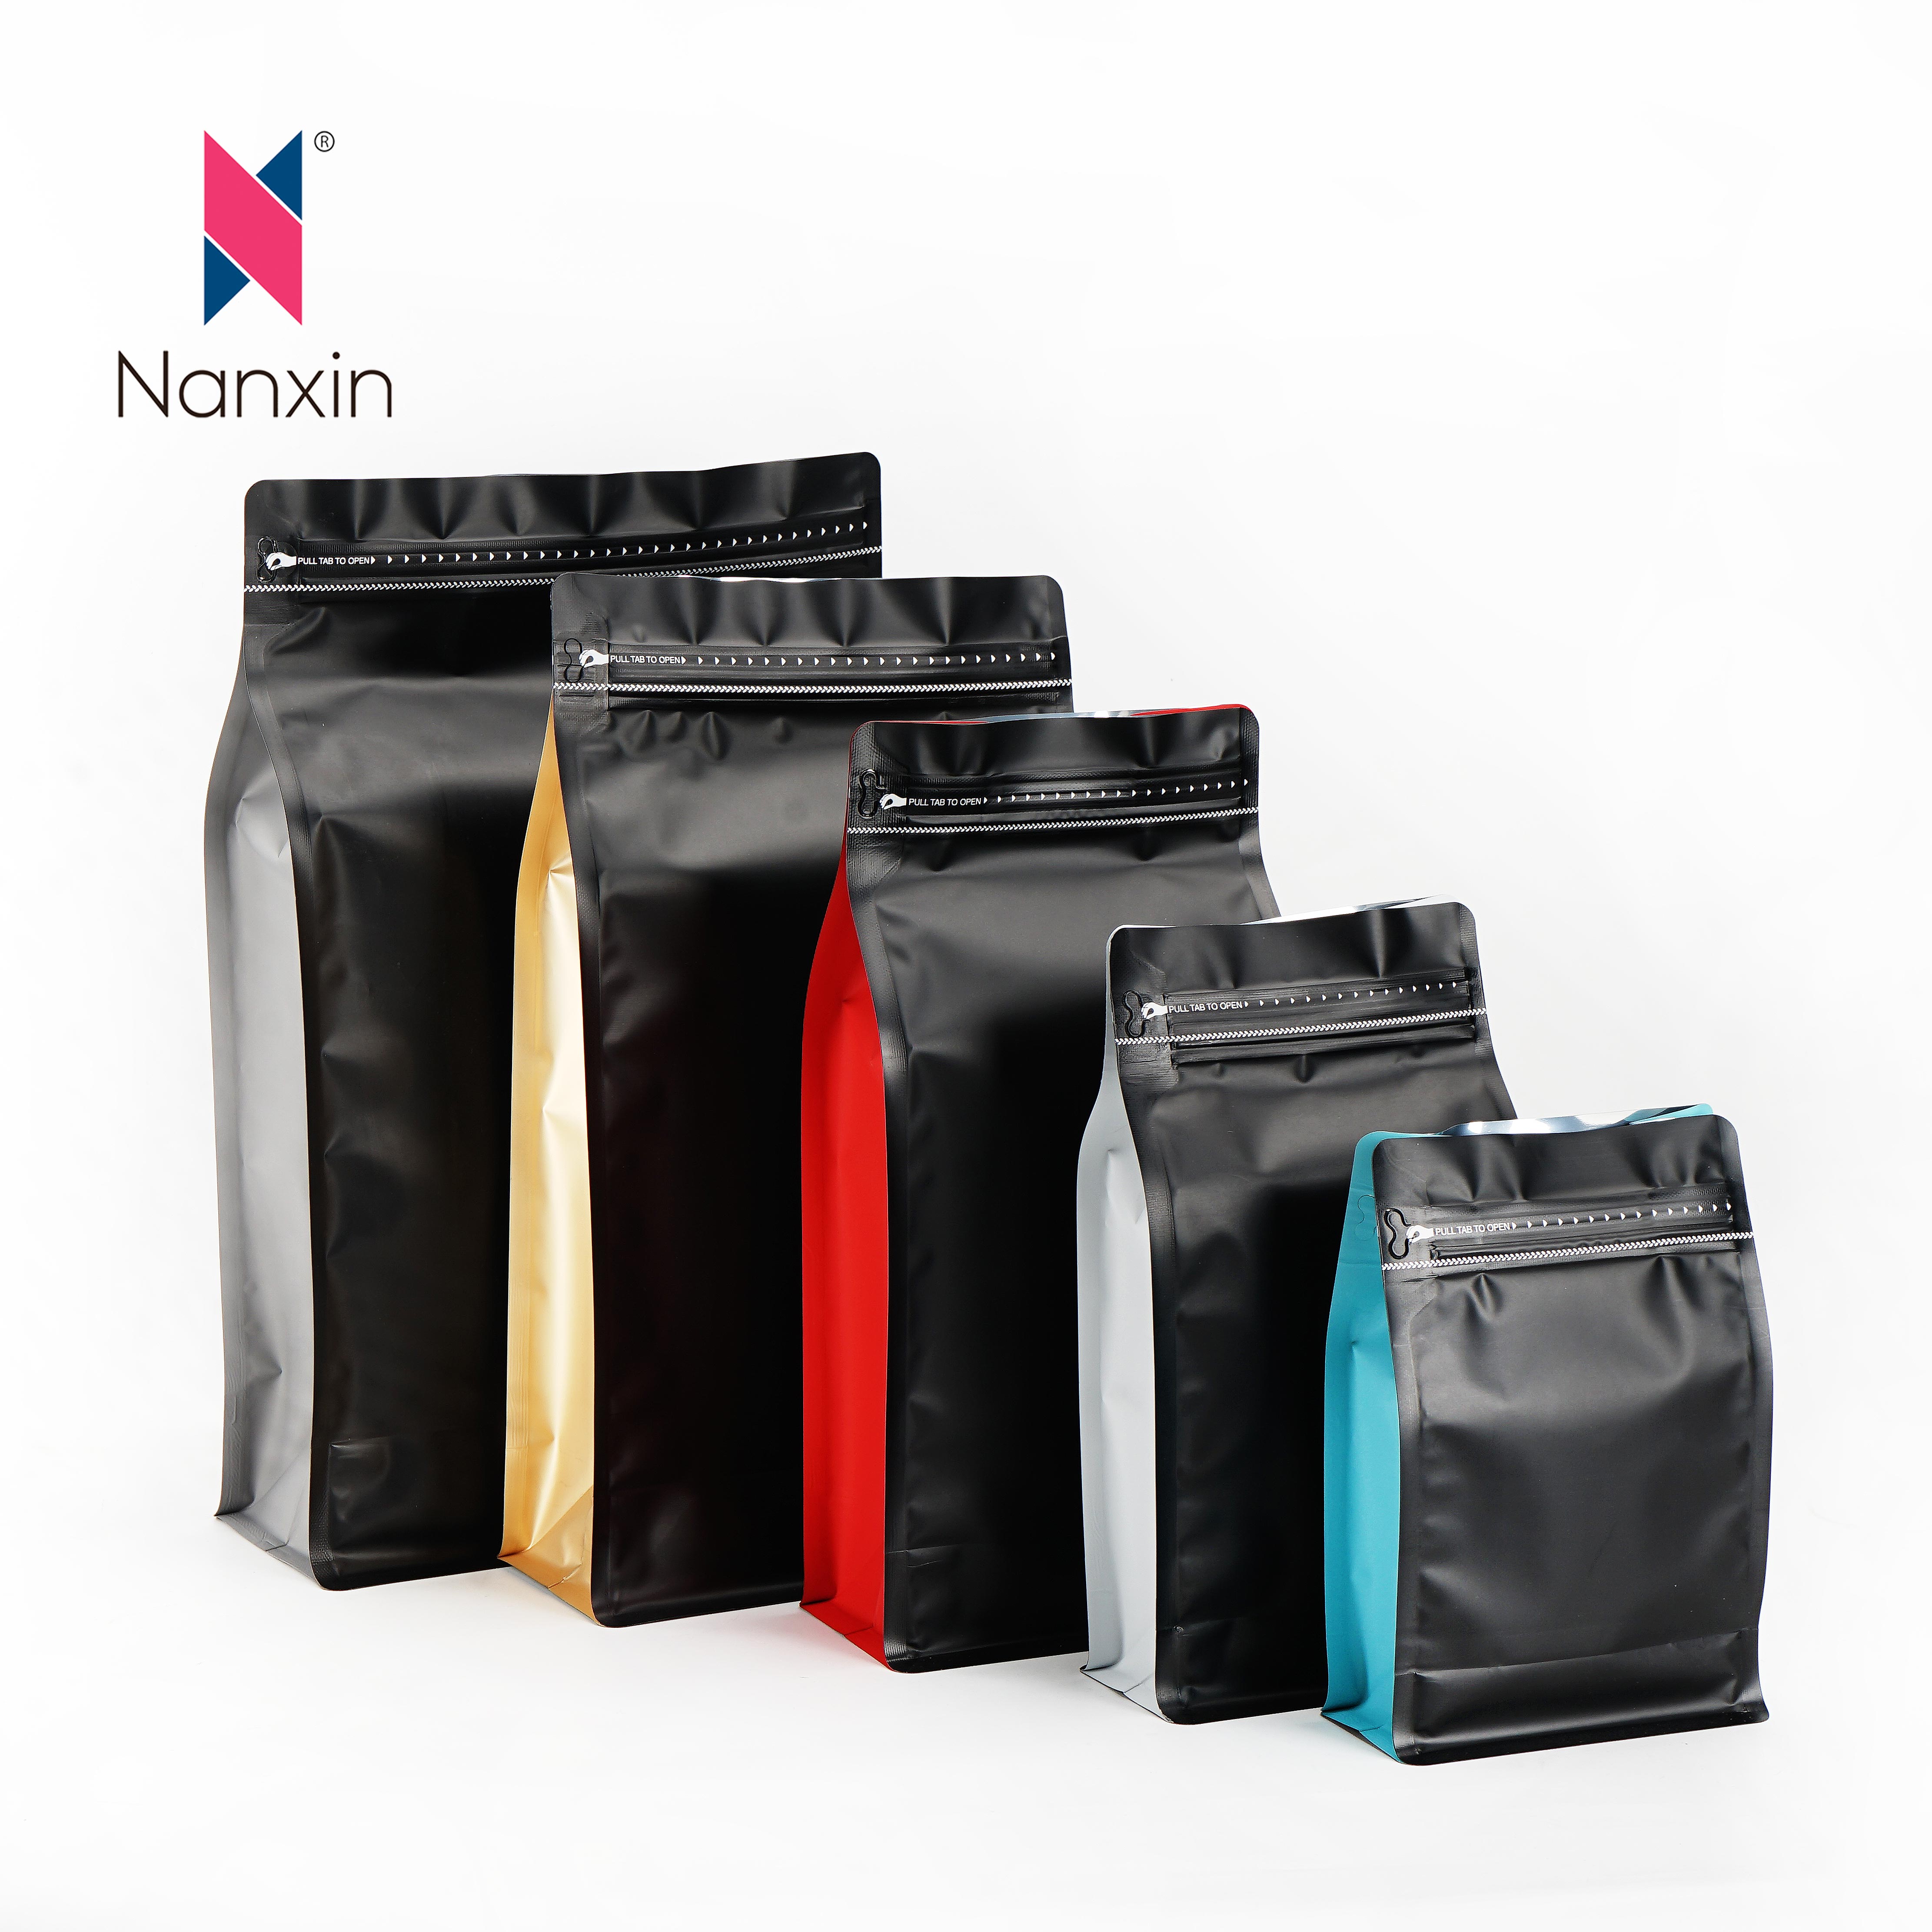 Biodegradable Recycled Custom 1kg Coffee Bags Valve Kraft Paper Flat Bottom Bag Zipper Resealable Coffee Bags With Valve